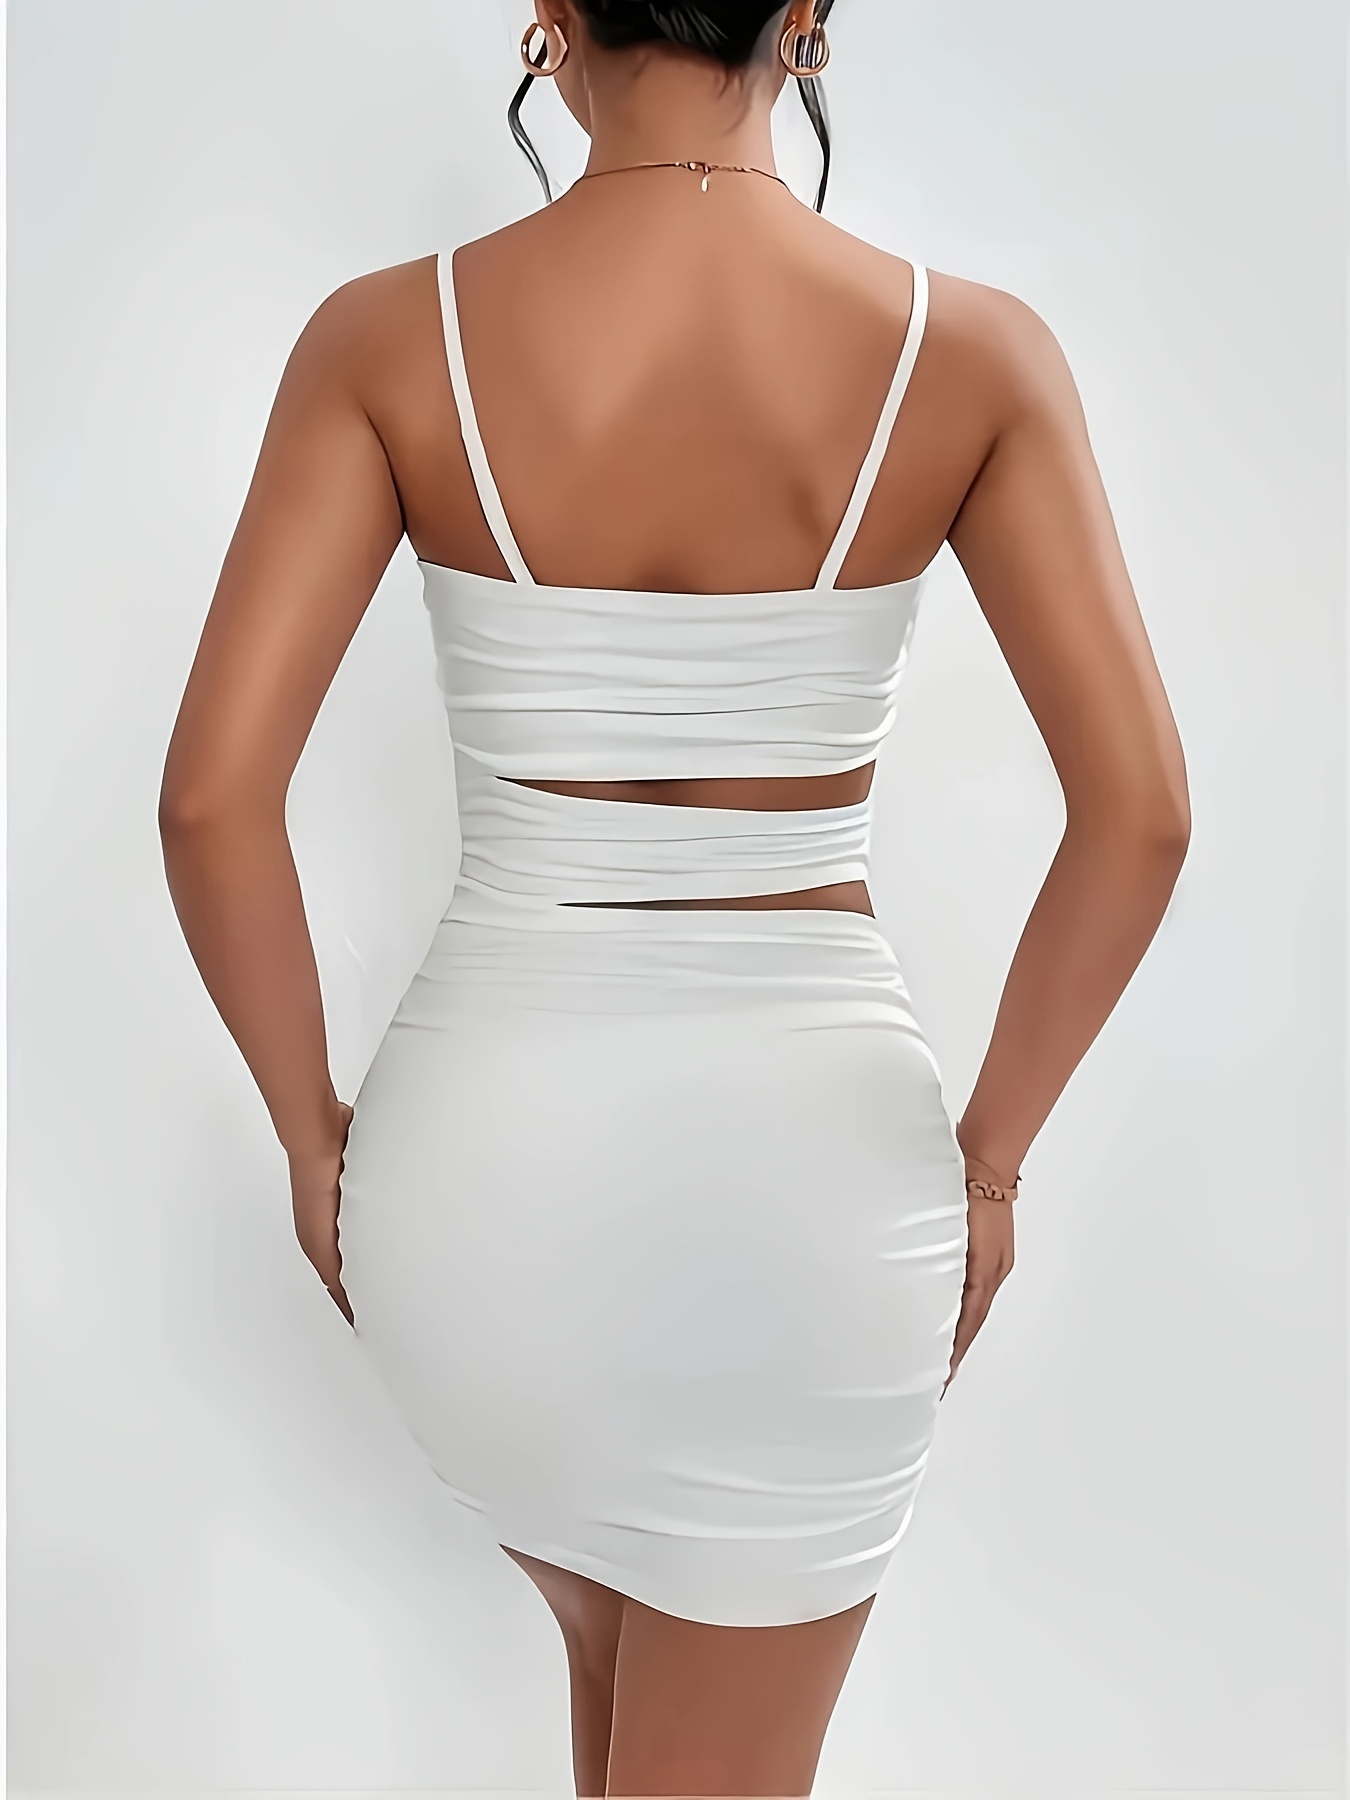  Women's White Dress Solid Ruched Side Cami Bodycon